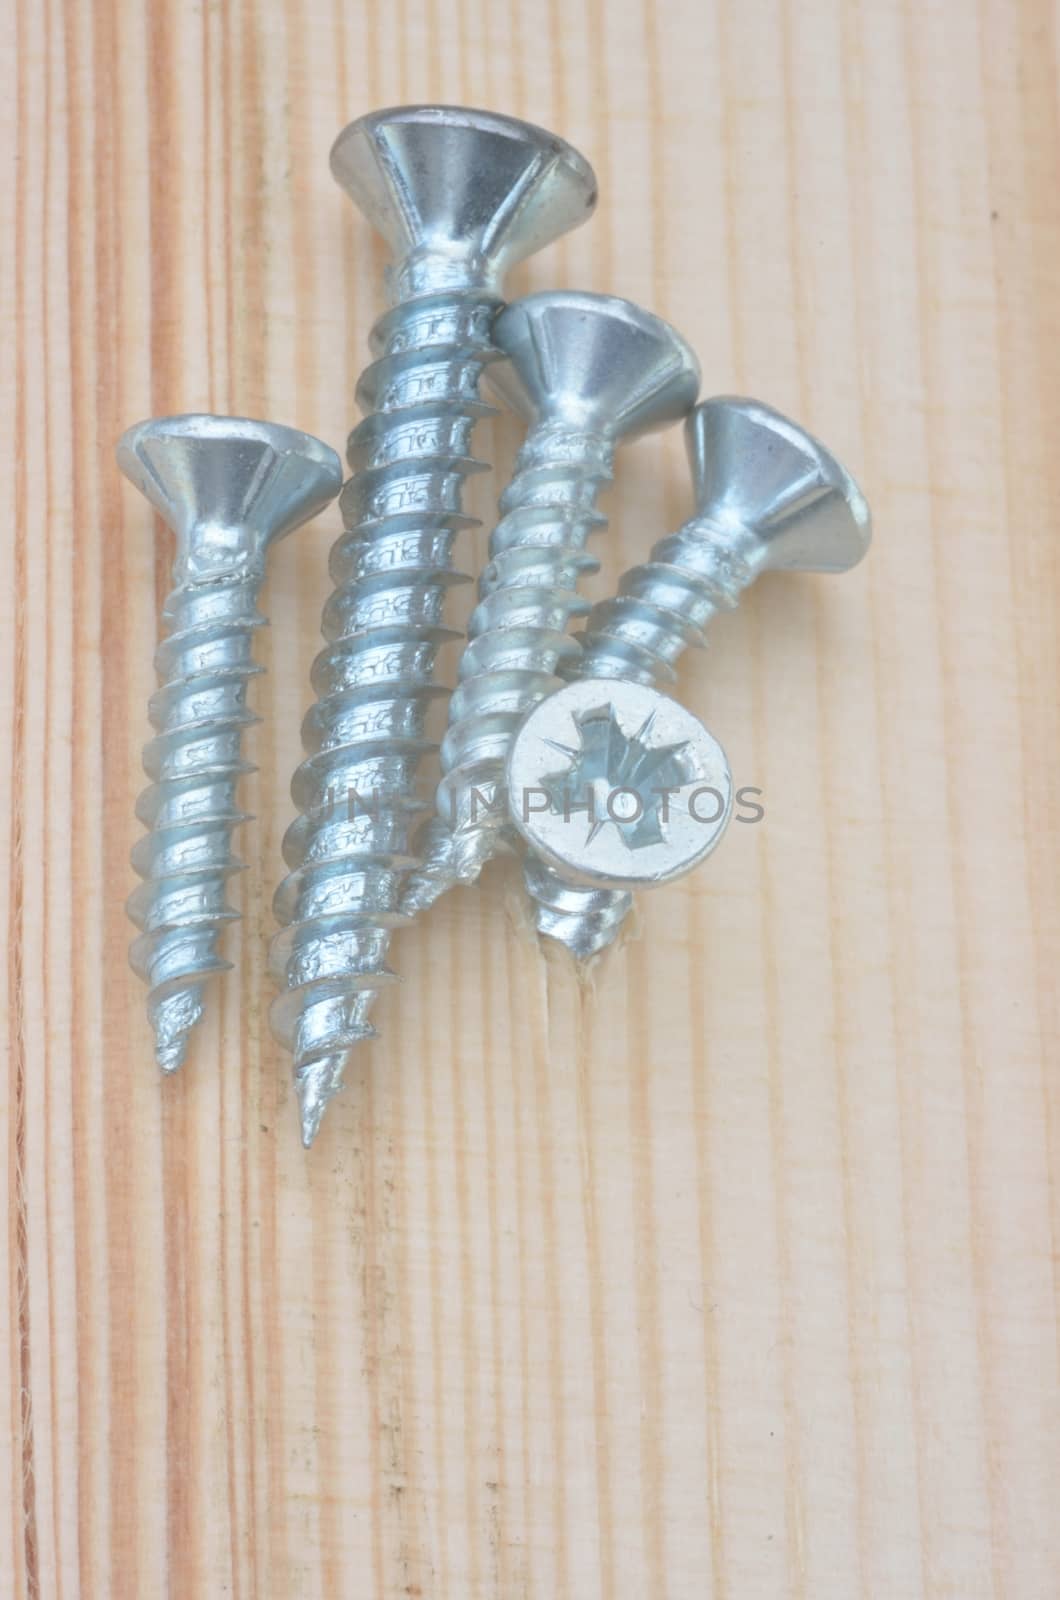 Group of screws on wooden background